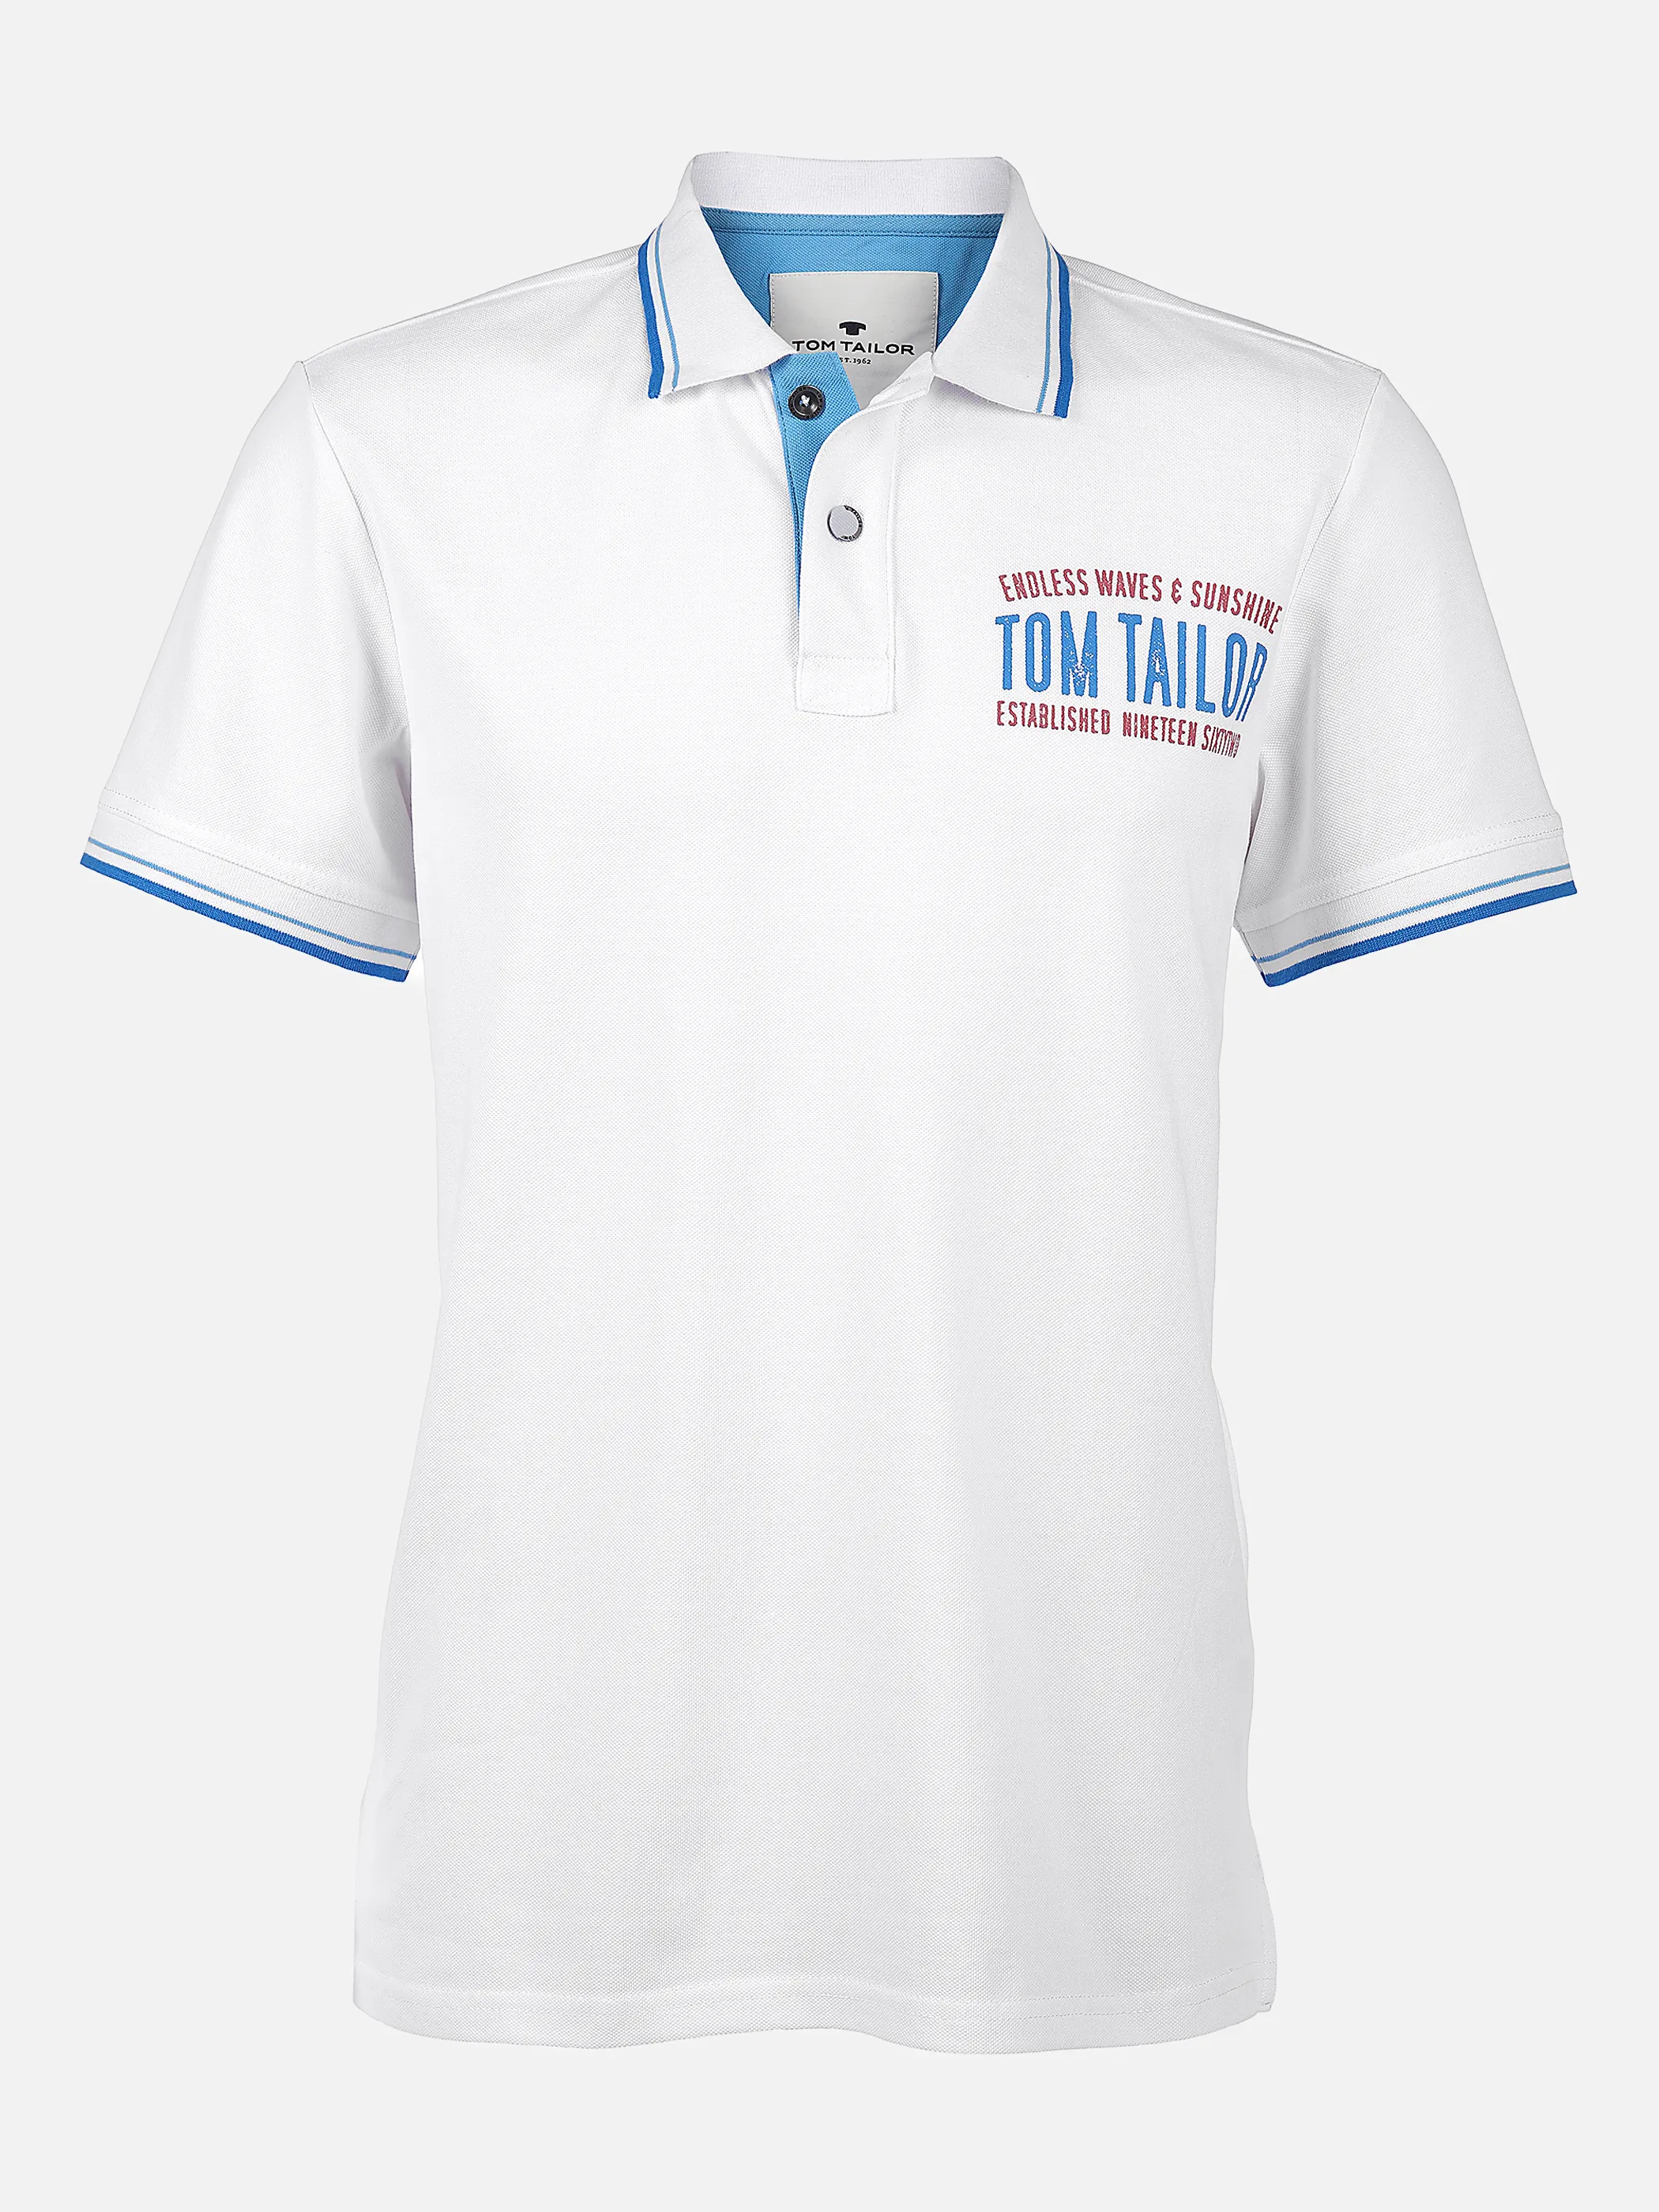 Tom Tailor 1021831 SMU decorated polo Weiß 839892 20000 1